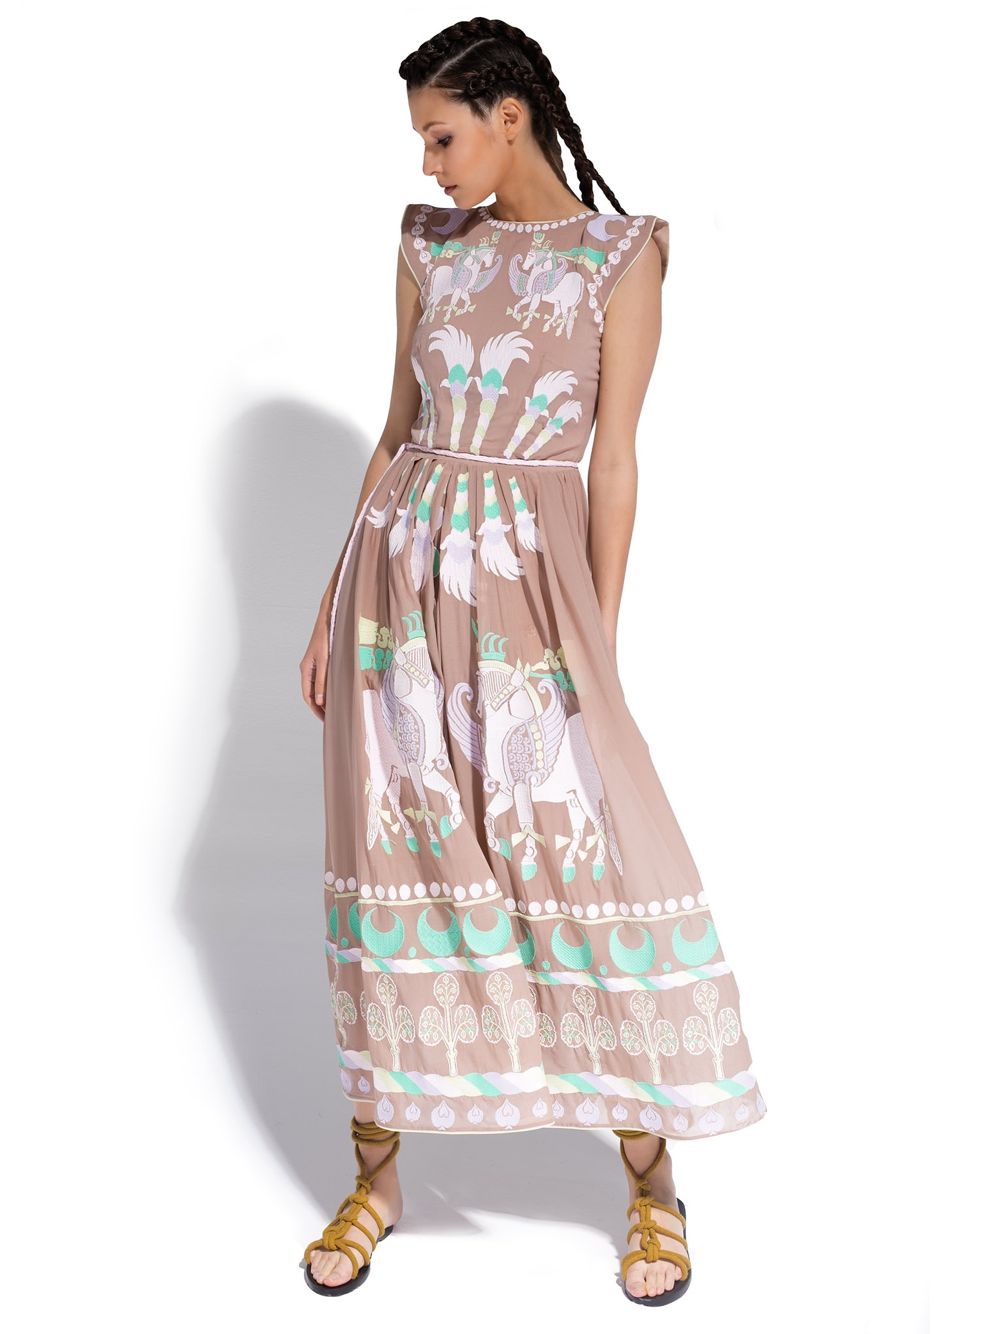 Sik Dress 'DAY SPRING HORSE'